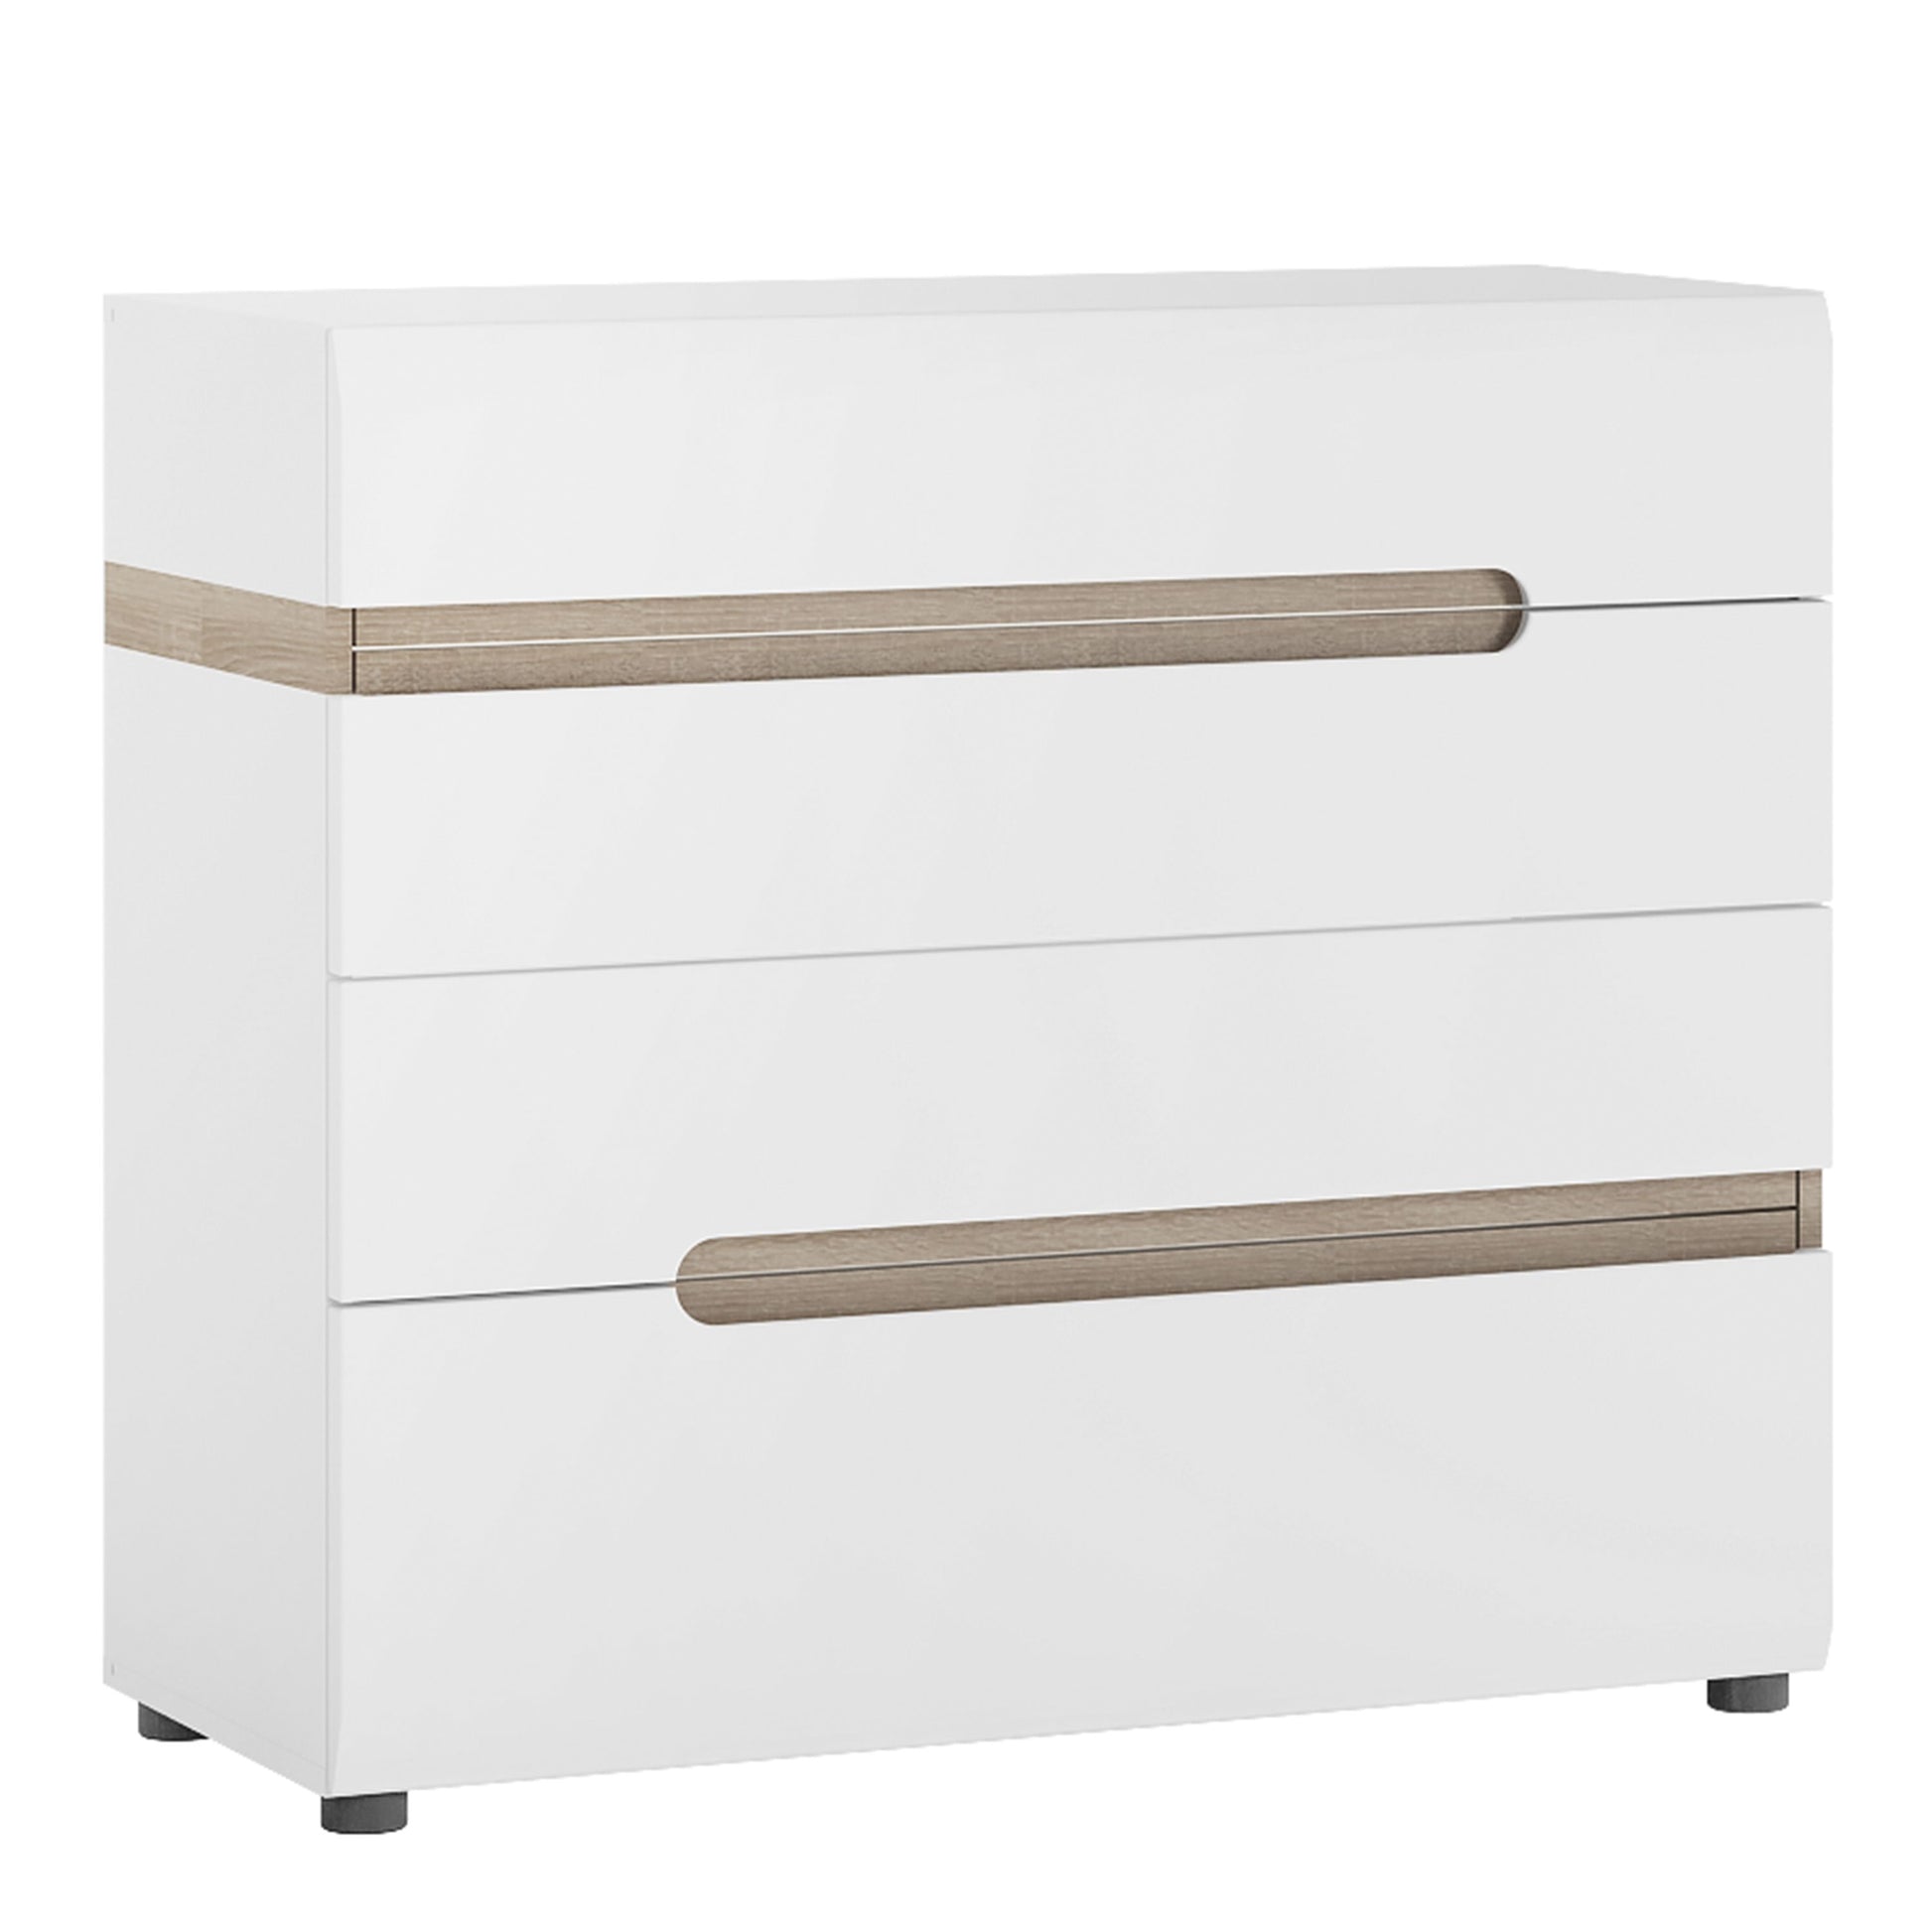 Chelsea Bedroom 4 Drawer Chest in White with a Truffle Oak Trim - NIXO Furniture.com